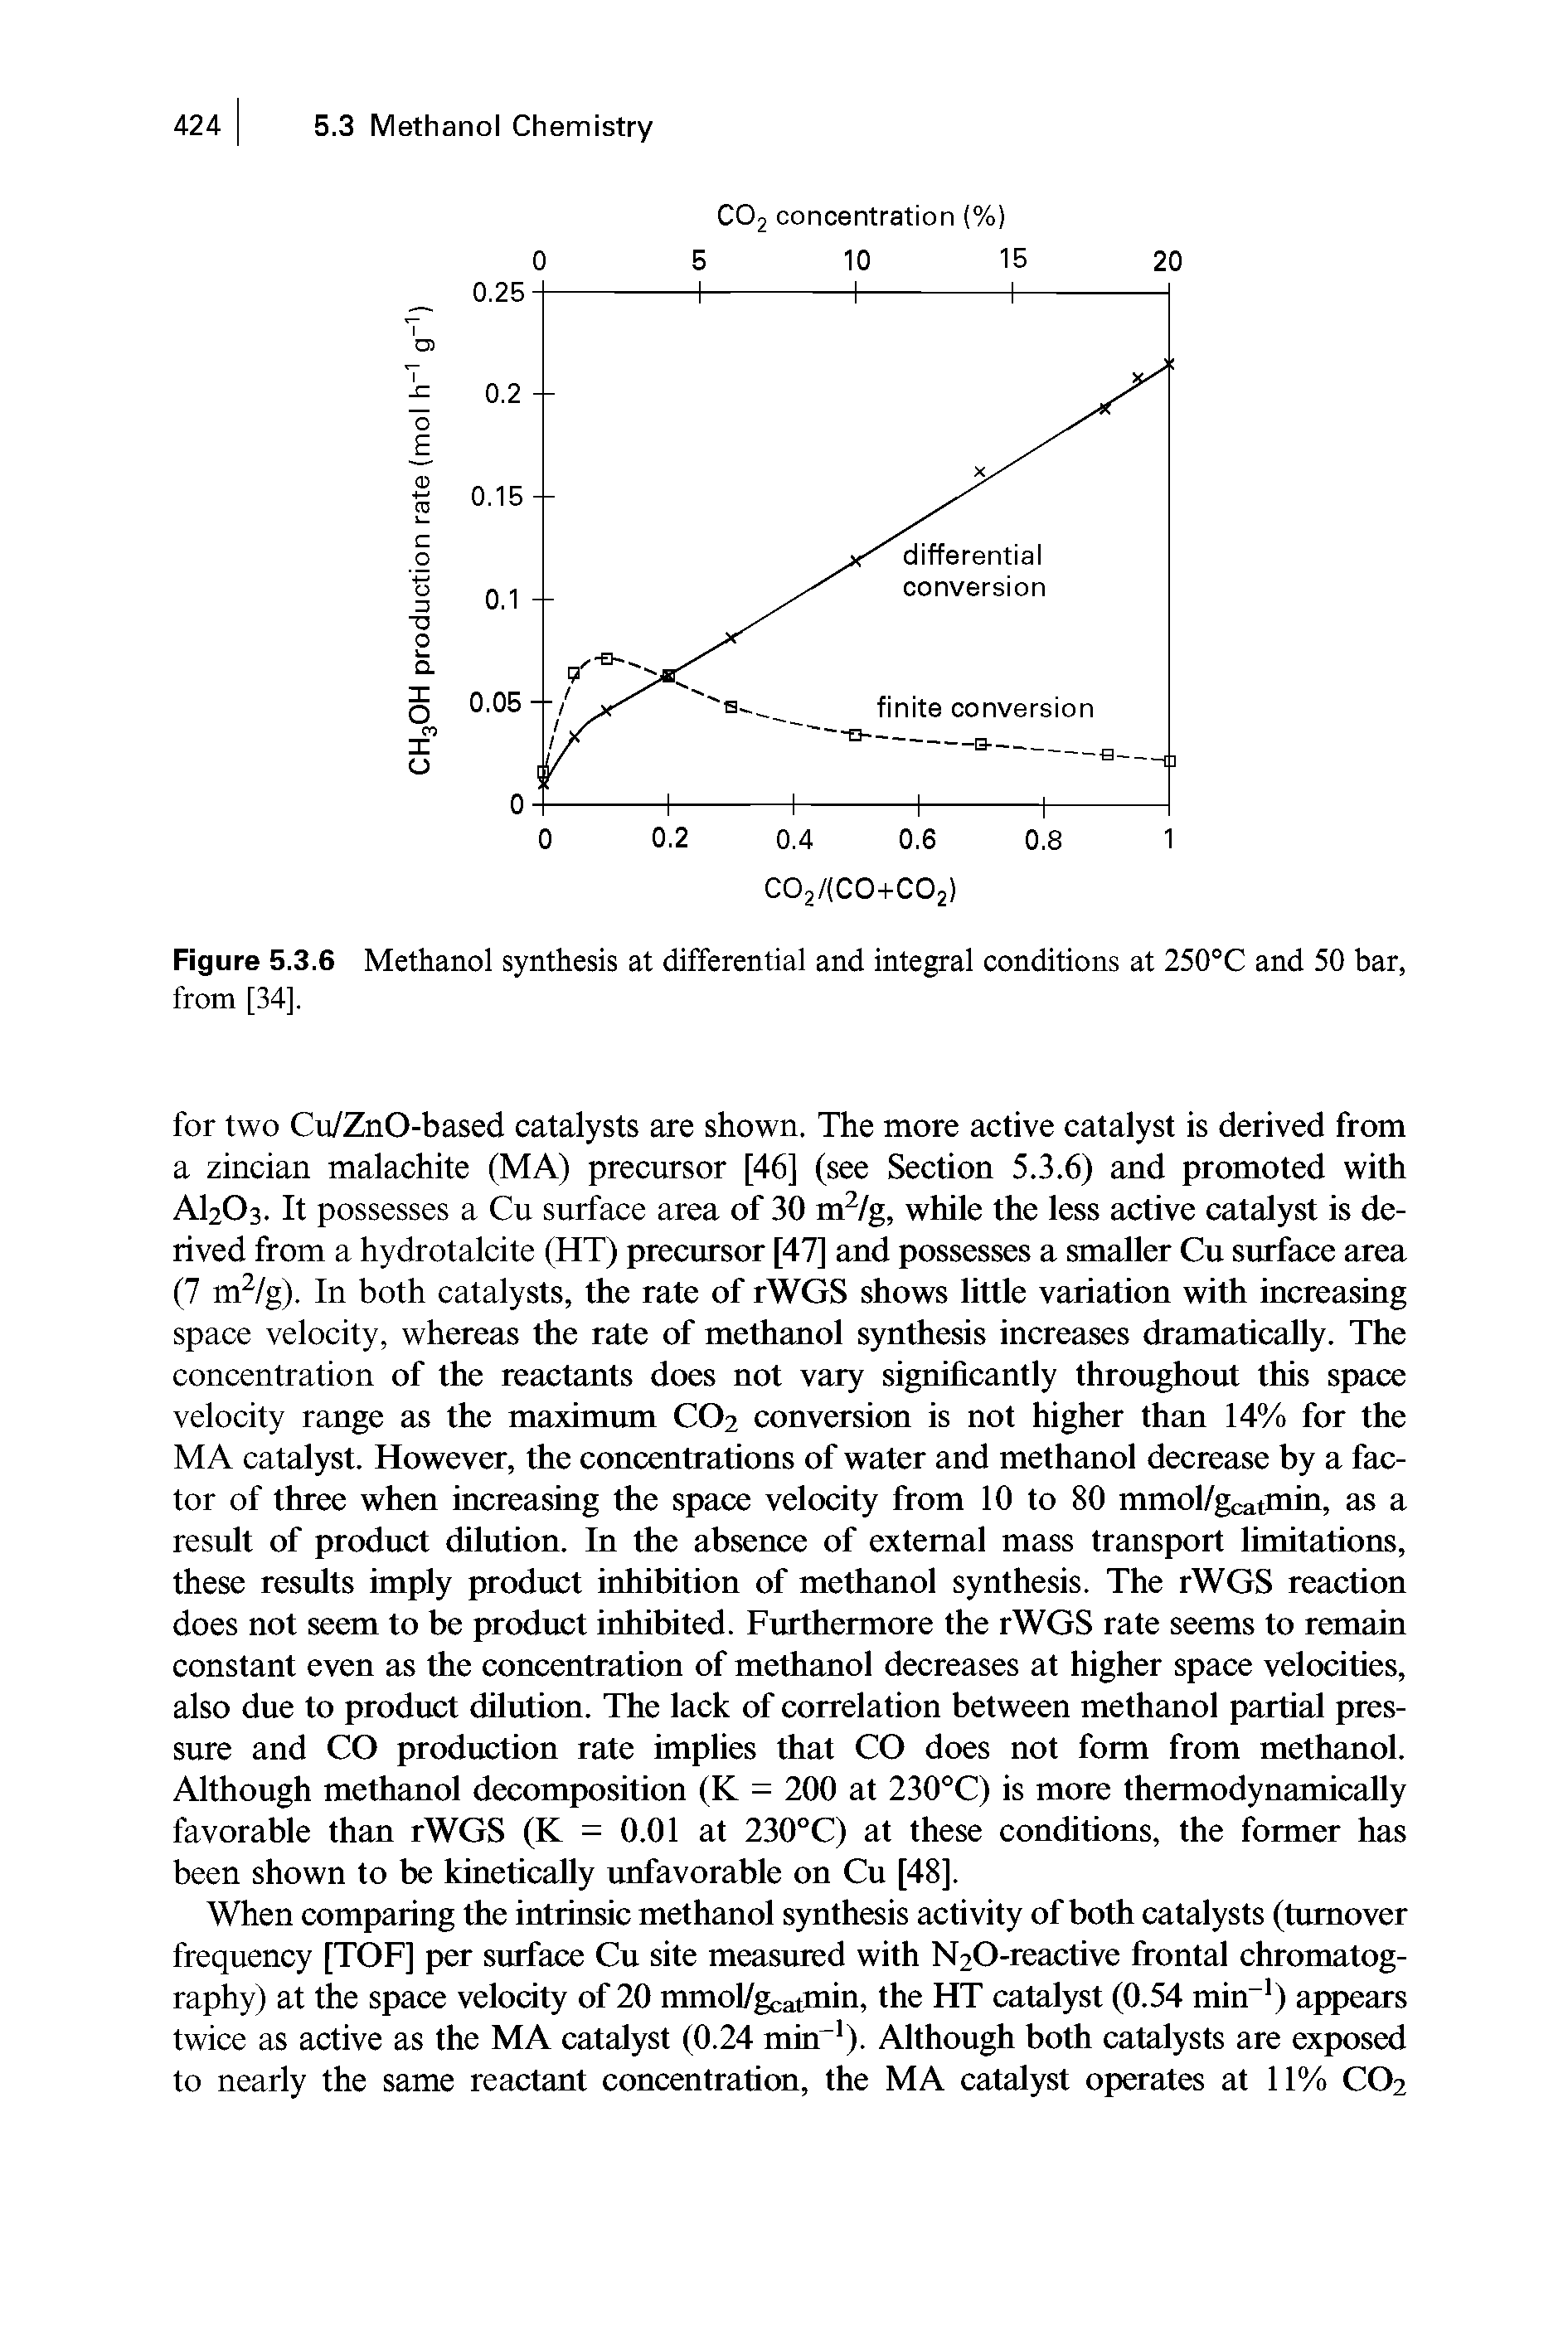 Figure 5.3.6 Methanol synthesis at differential and integral conditions at 250°C and 50 bar, from [34],...